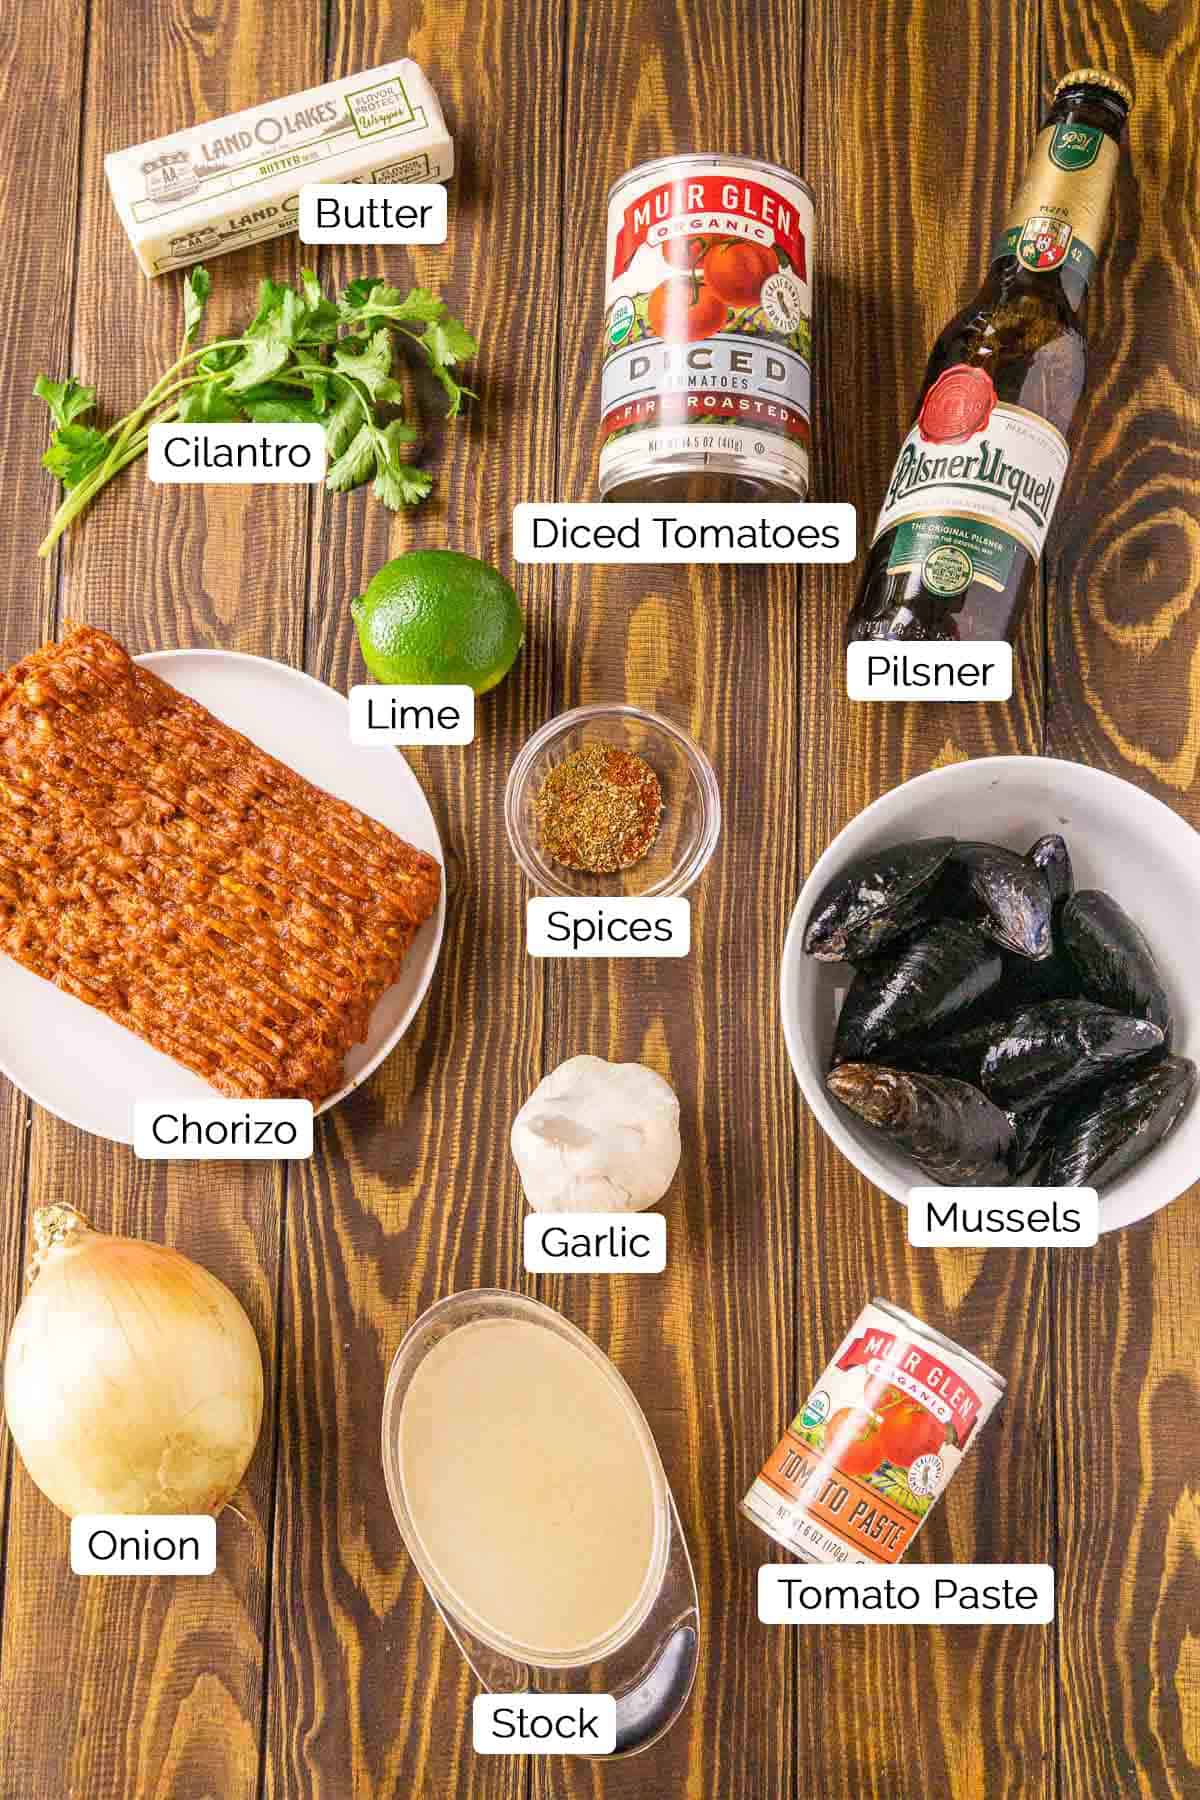 The ingredients for the beer mussels on a brown wooden board with black and white labels by each item.